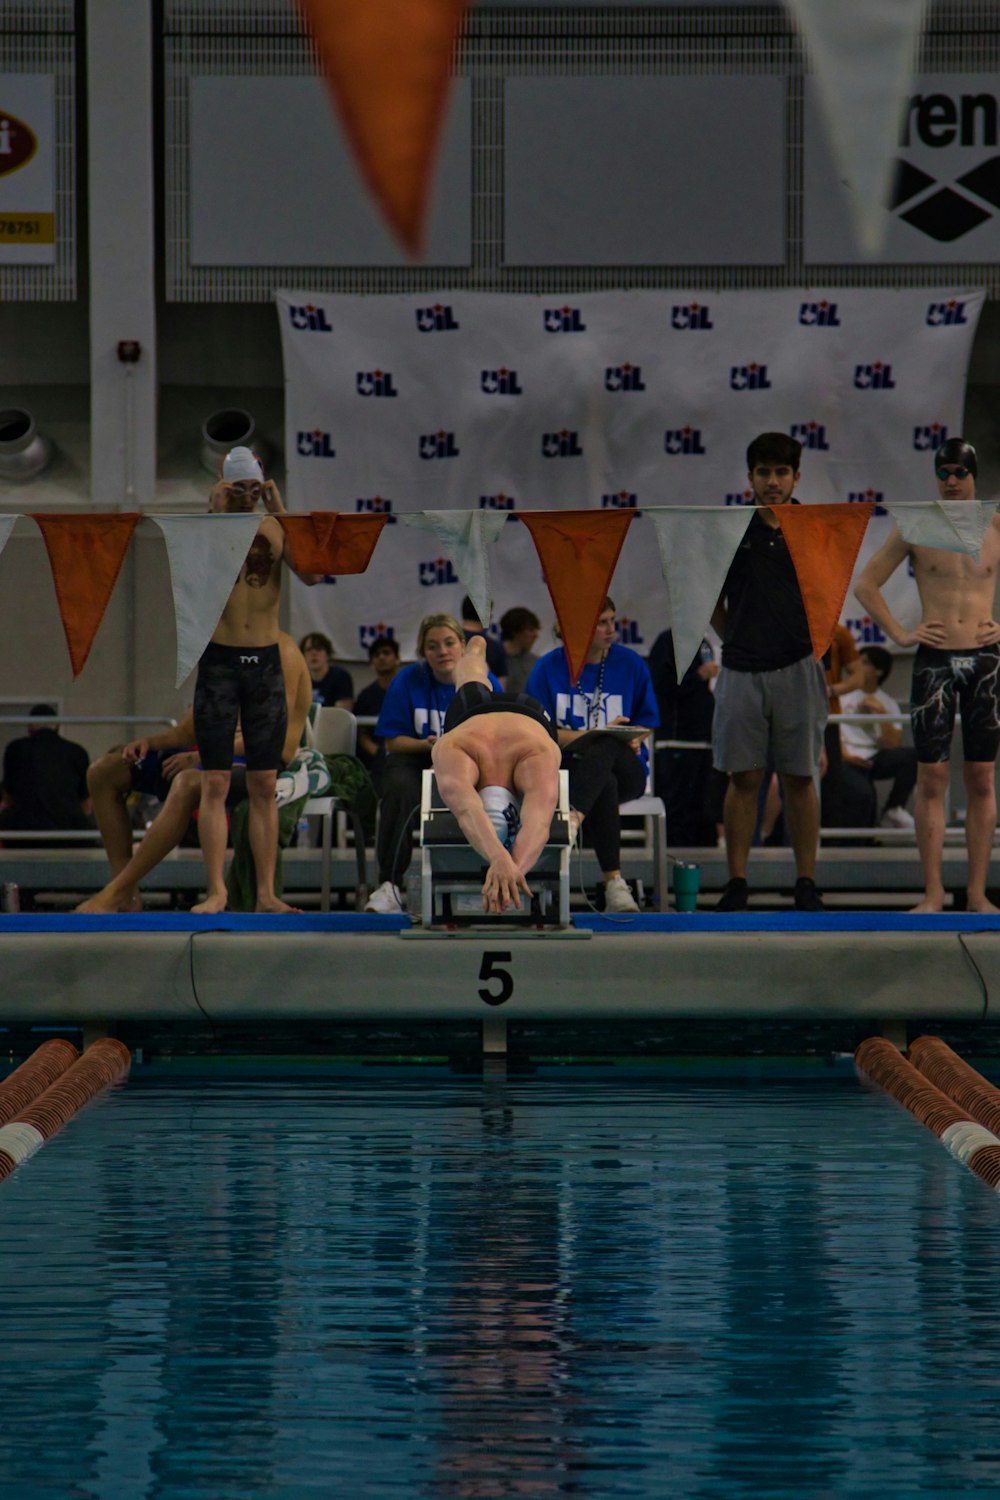 a man diving into a pool while others watch